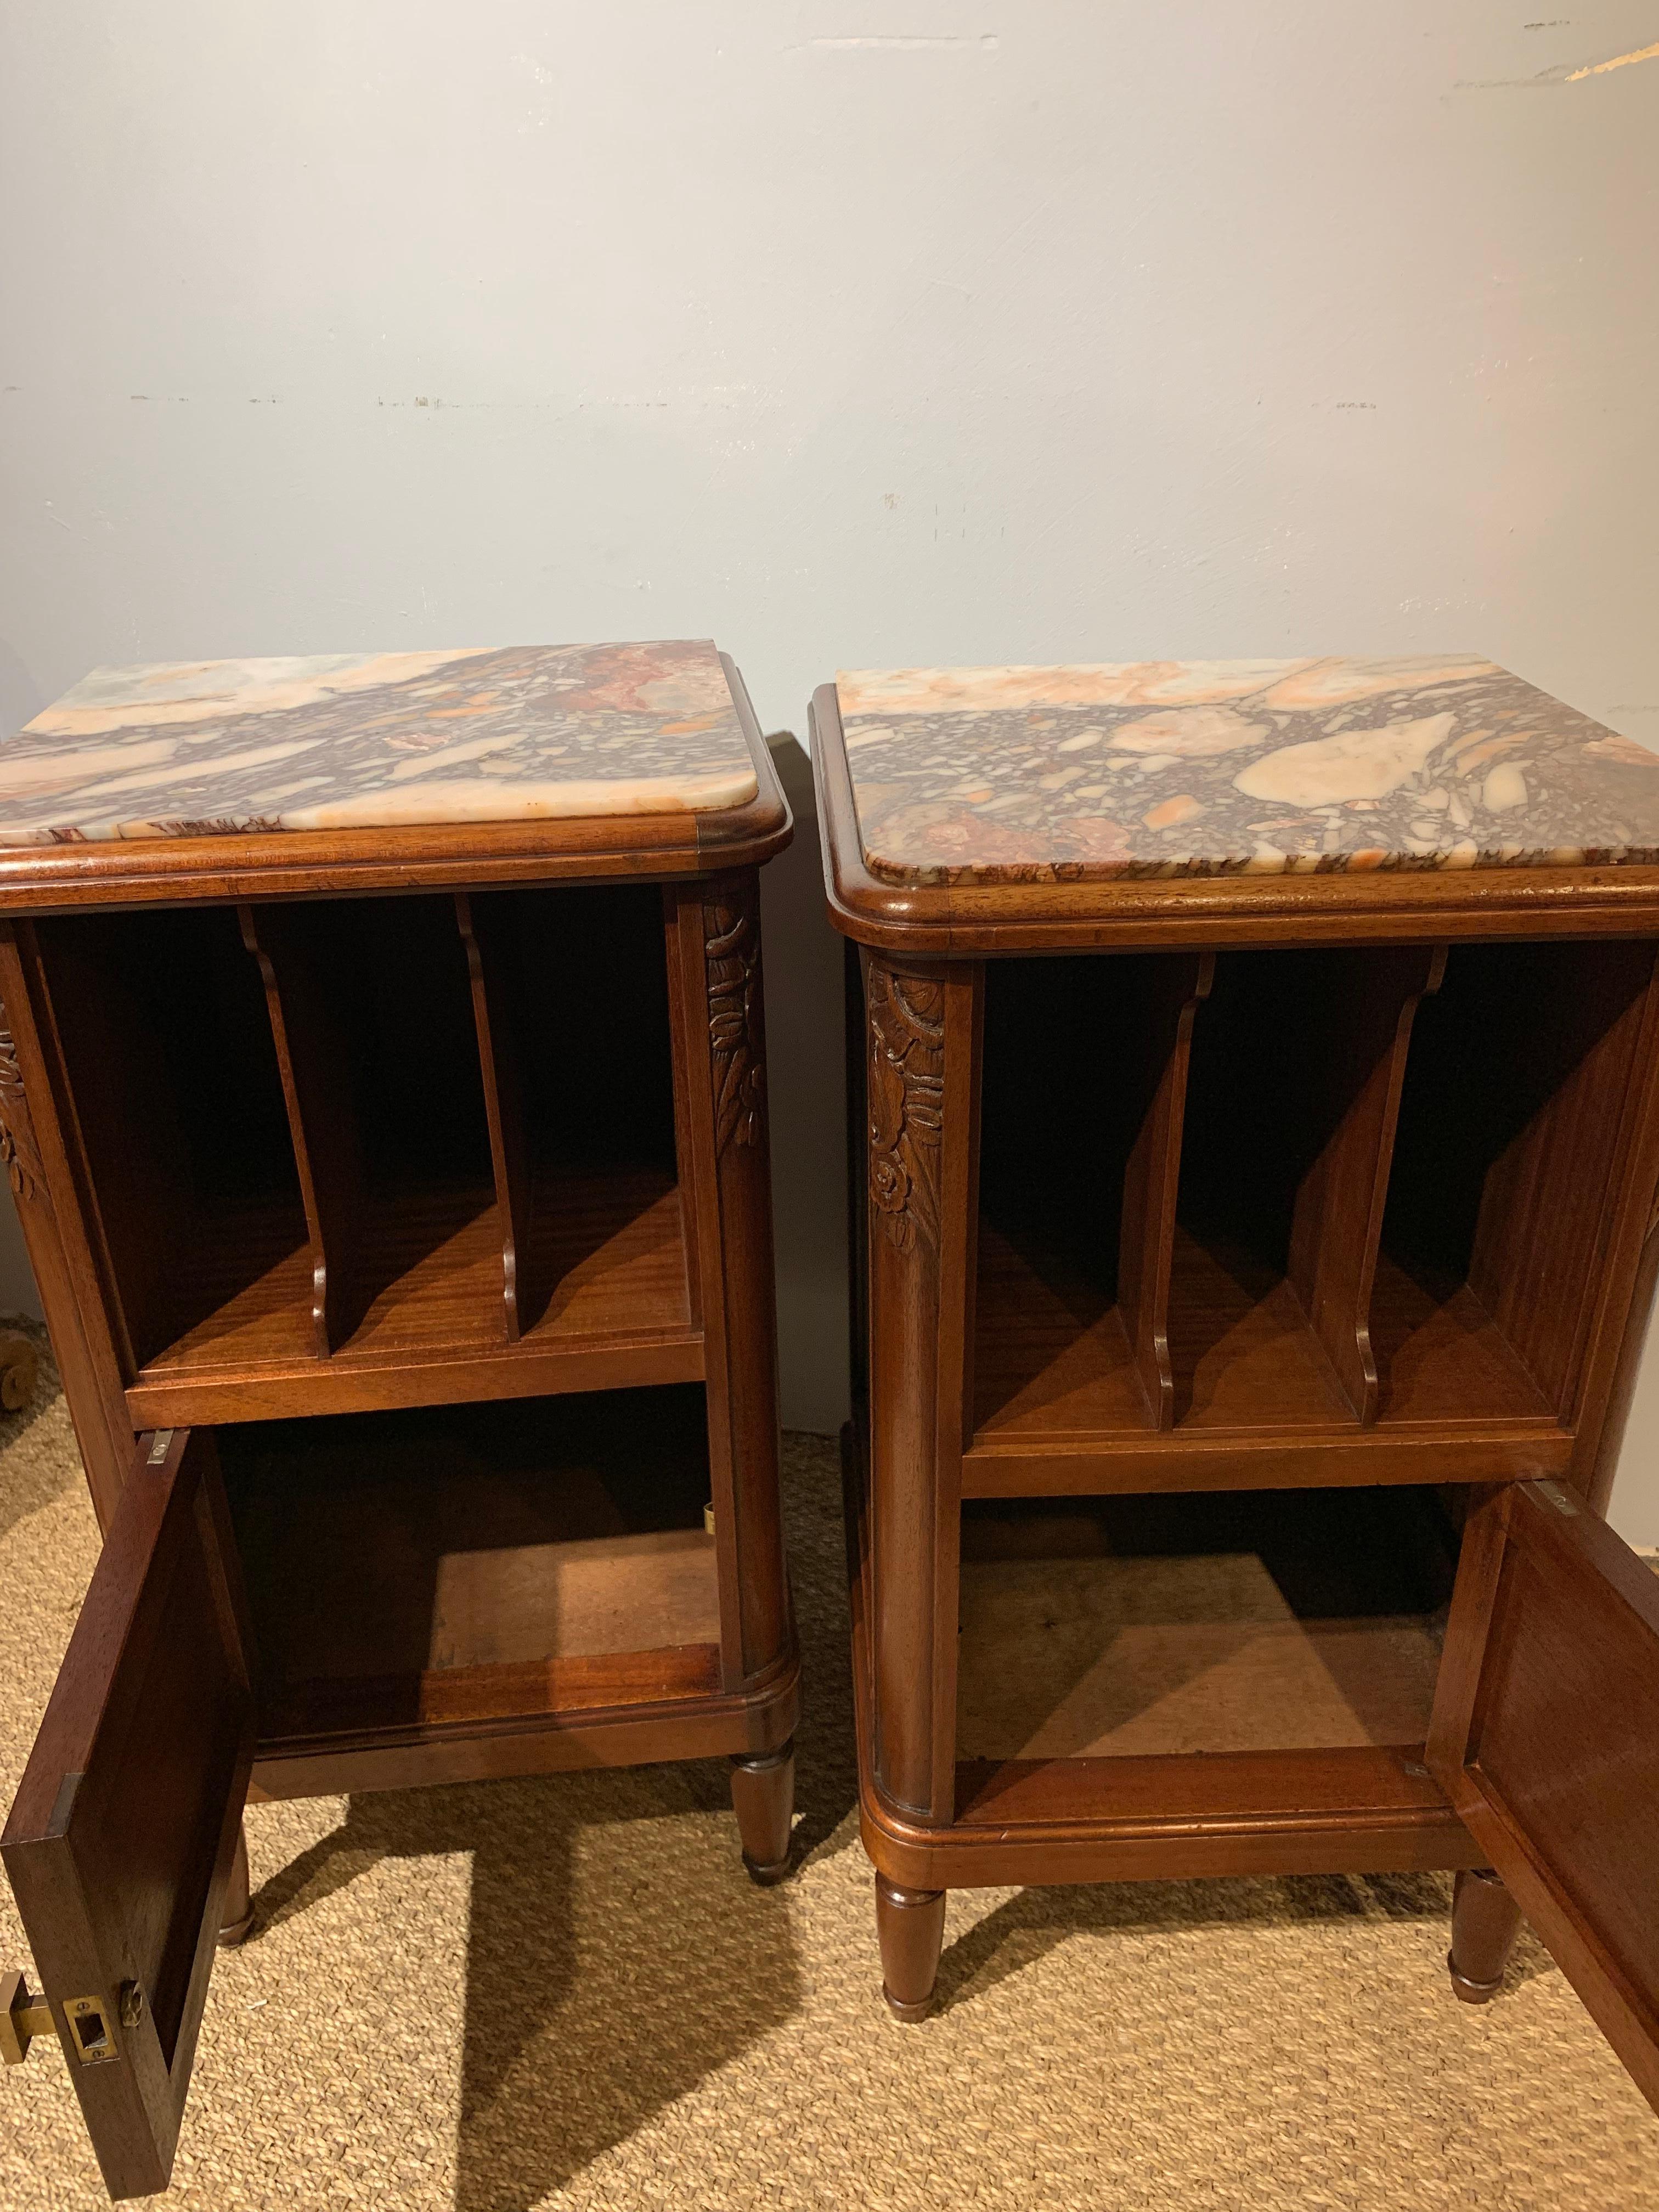 Good pair of mahogany and marble topped bedside cabinets, with original marble inserts / brass handle
Having been through our workshops, cleaned / polished ready to be placed in your home
Measures: Height 27 inches
Width 16 inches
Depth 15